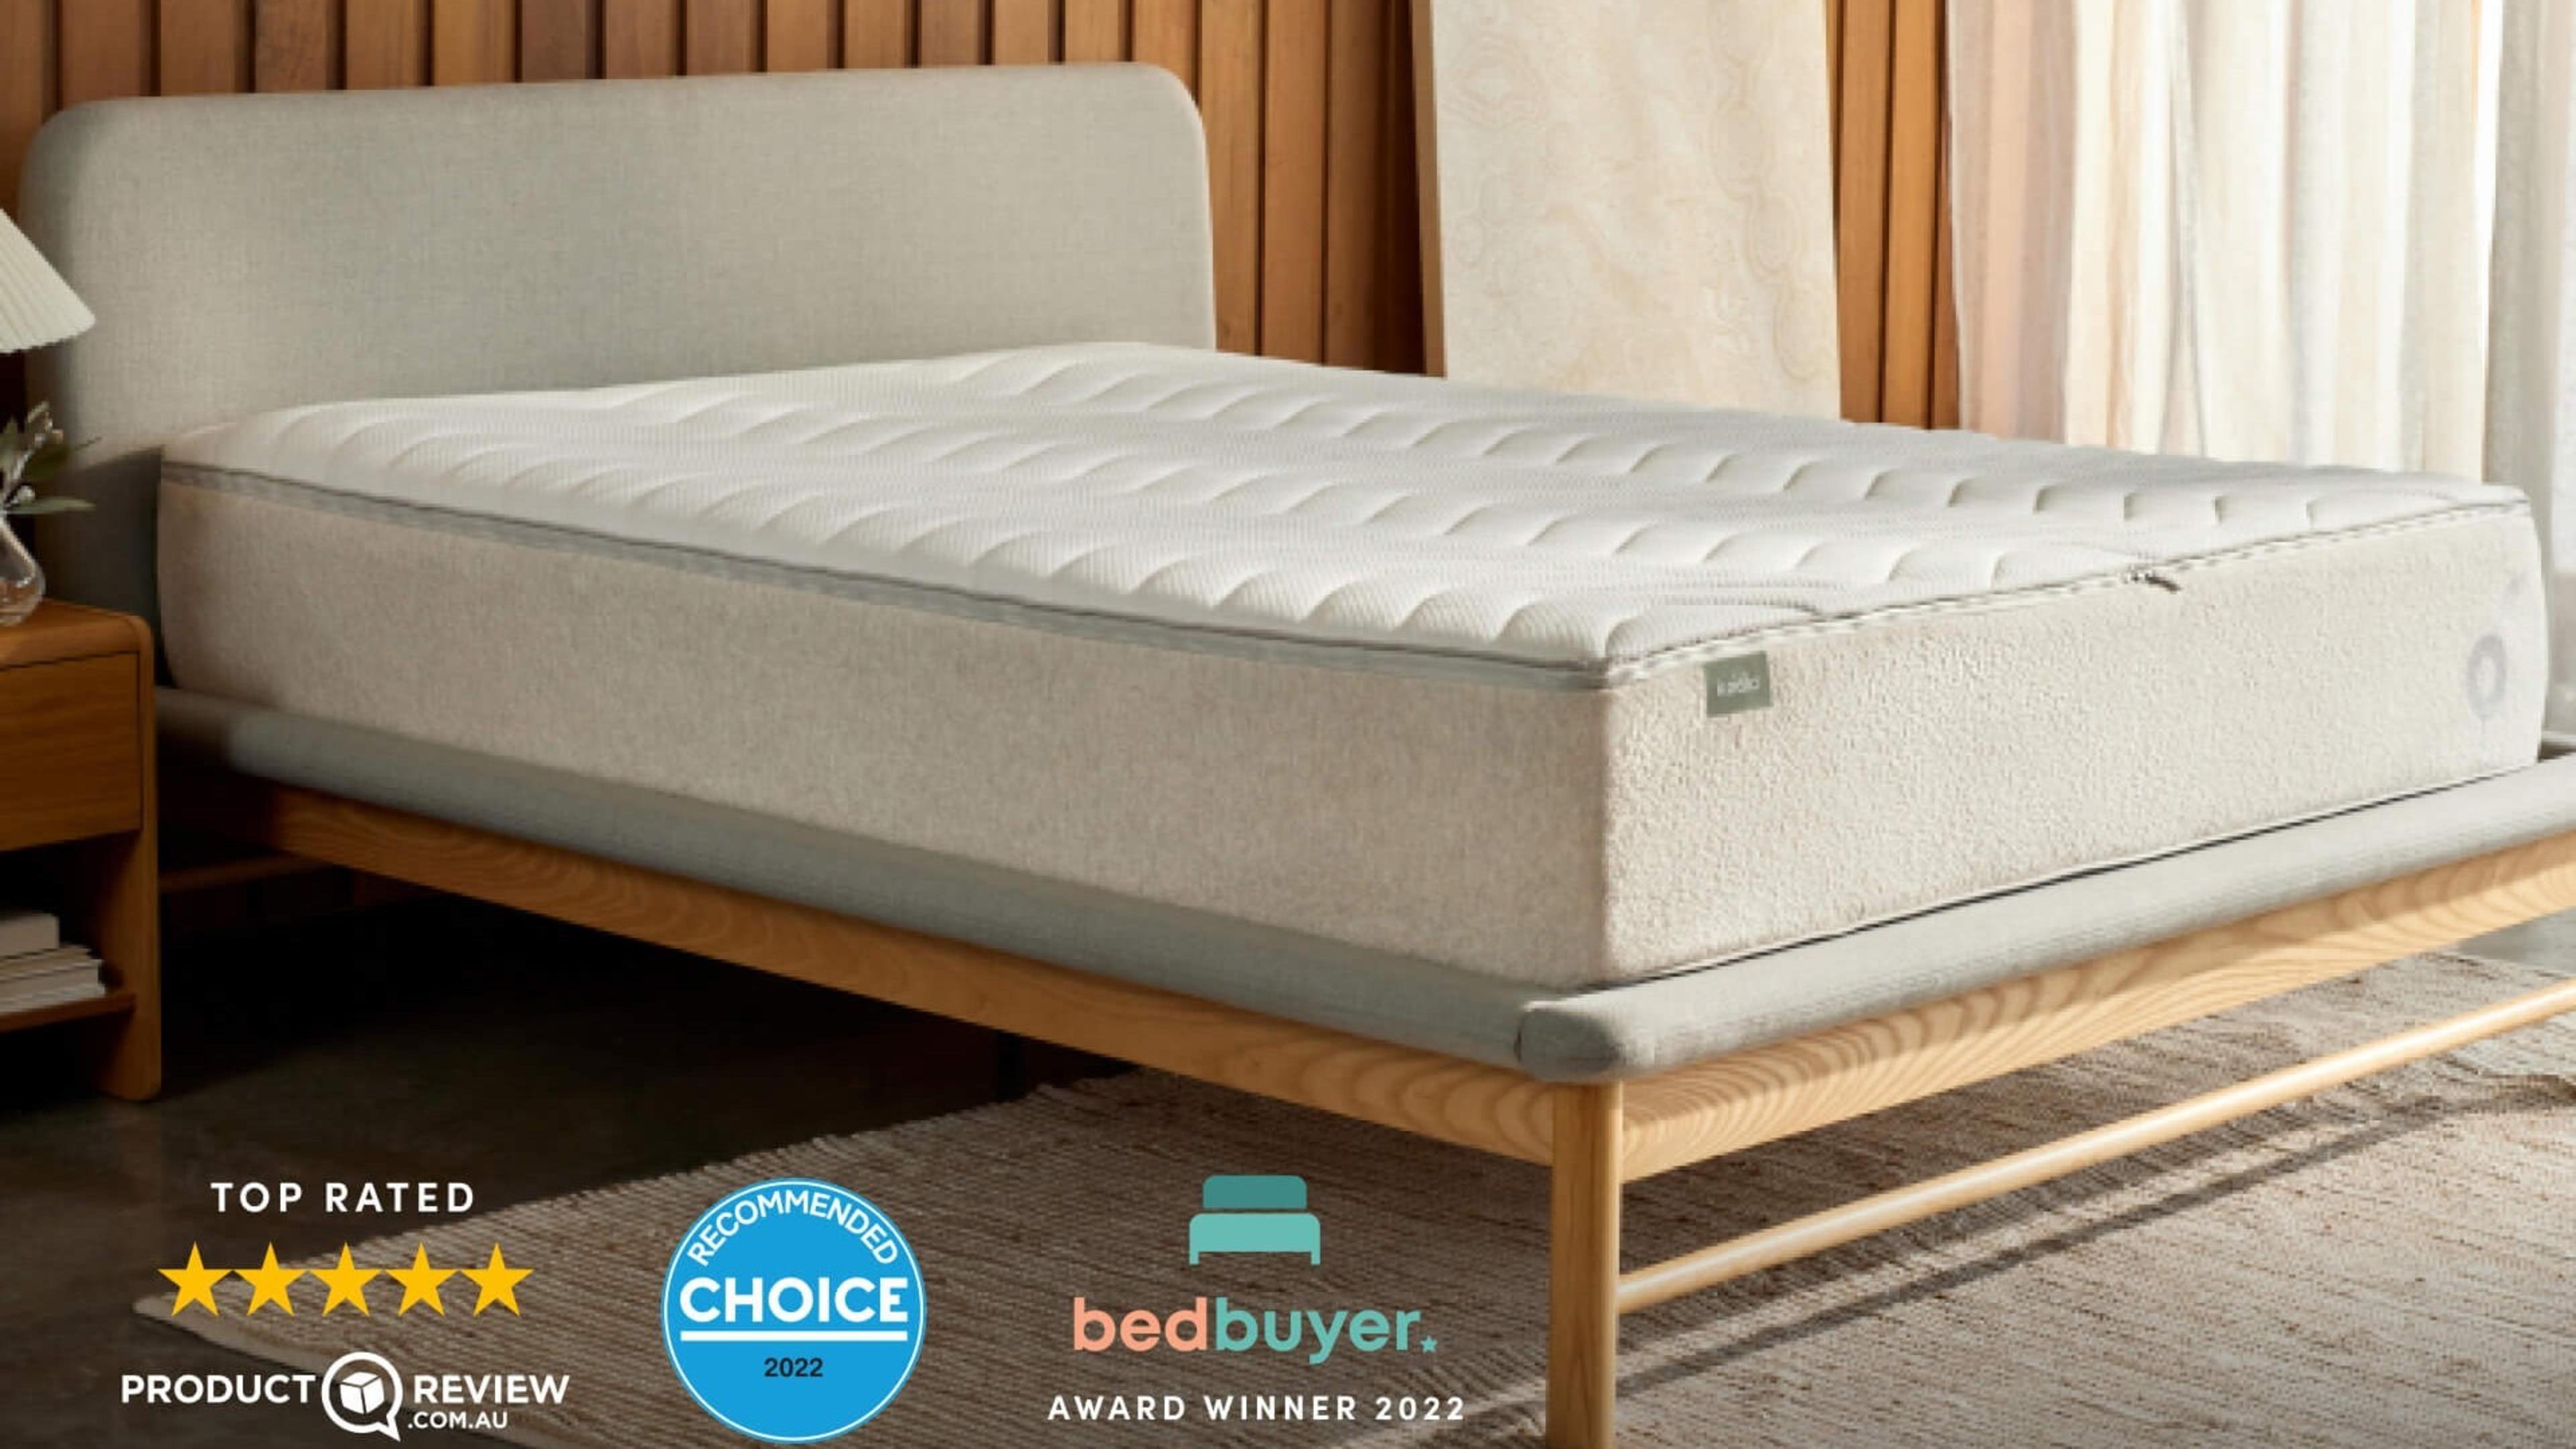 AU > Landing Page > Mattress Discover Page > image with logo